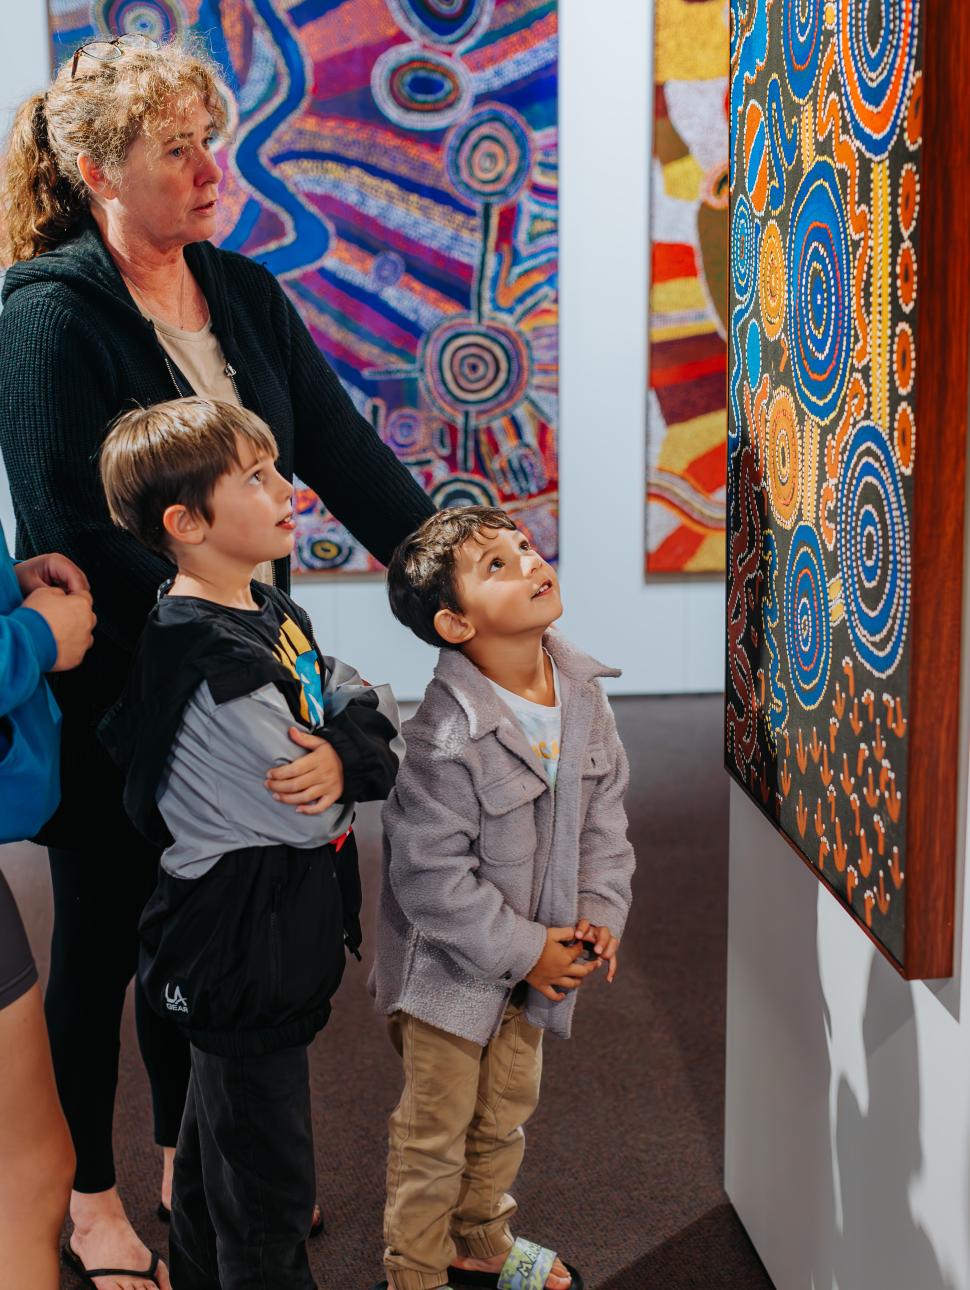 two oung children with their adults are looking at large artworks on display painted in traditional methods with vibrant colours 